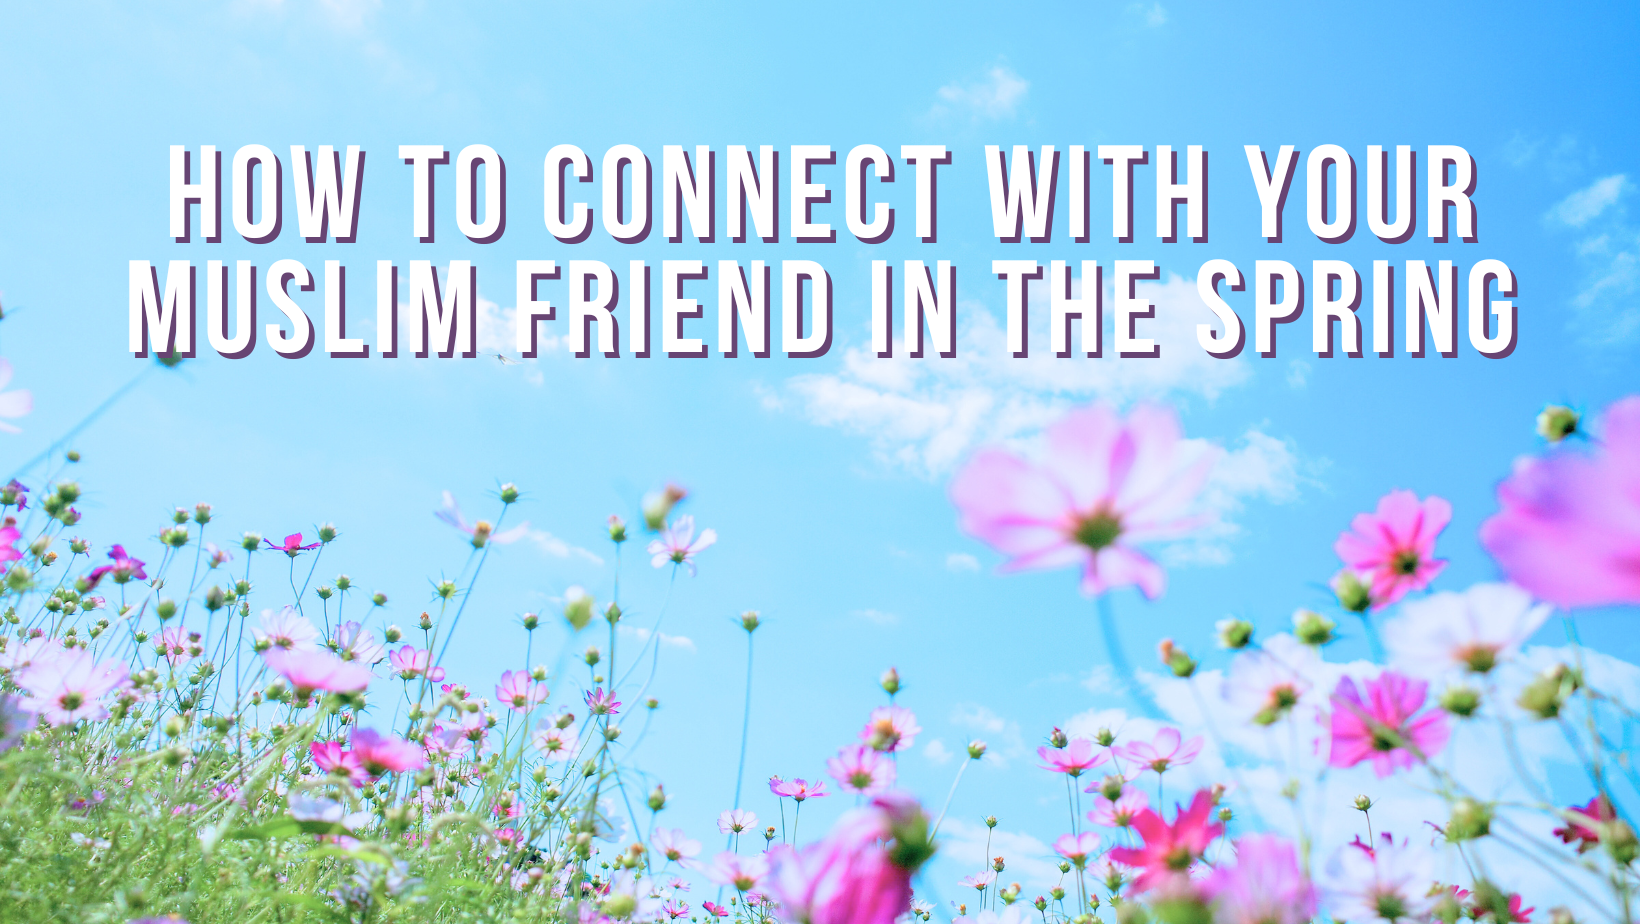 How to connect with your Muslim friend in the spring